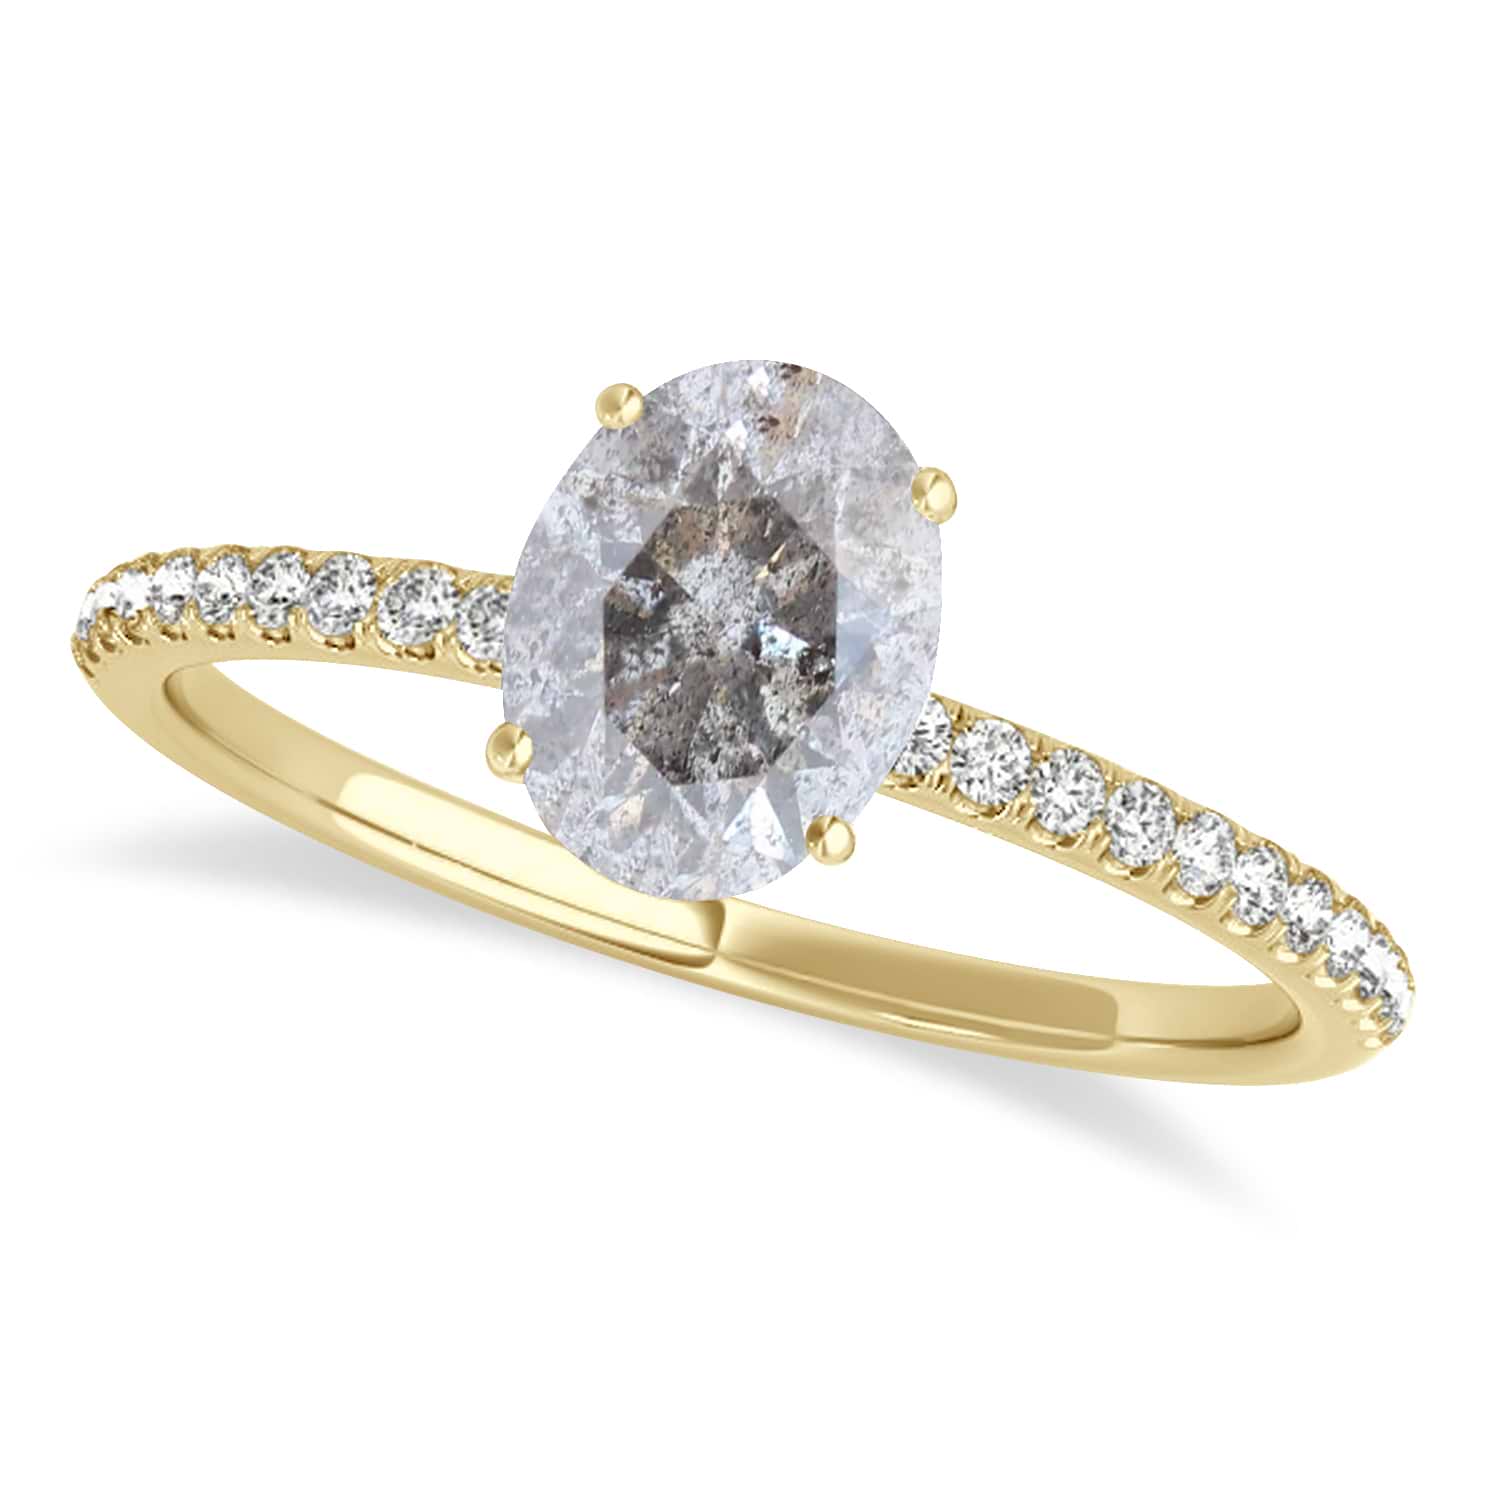 Oval Salt & Pepper Diamond Accented  Engagement Ring 14k Yellow Gold (1.50ct)